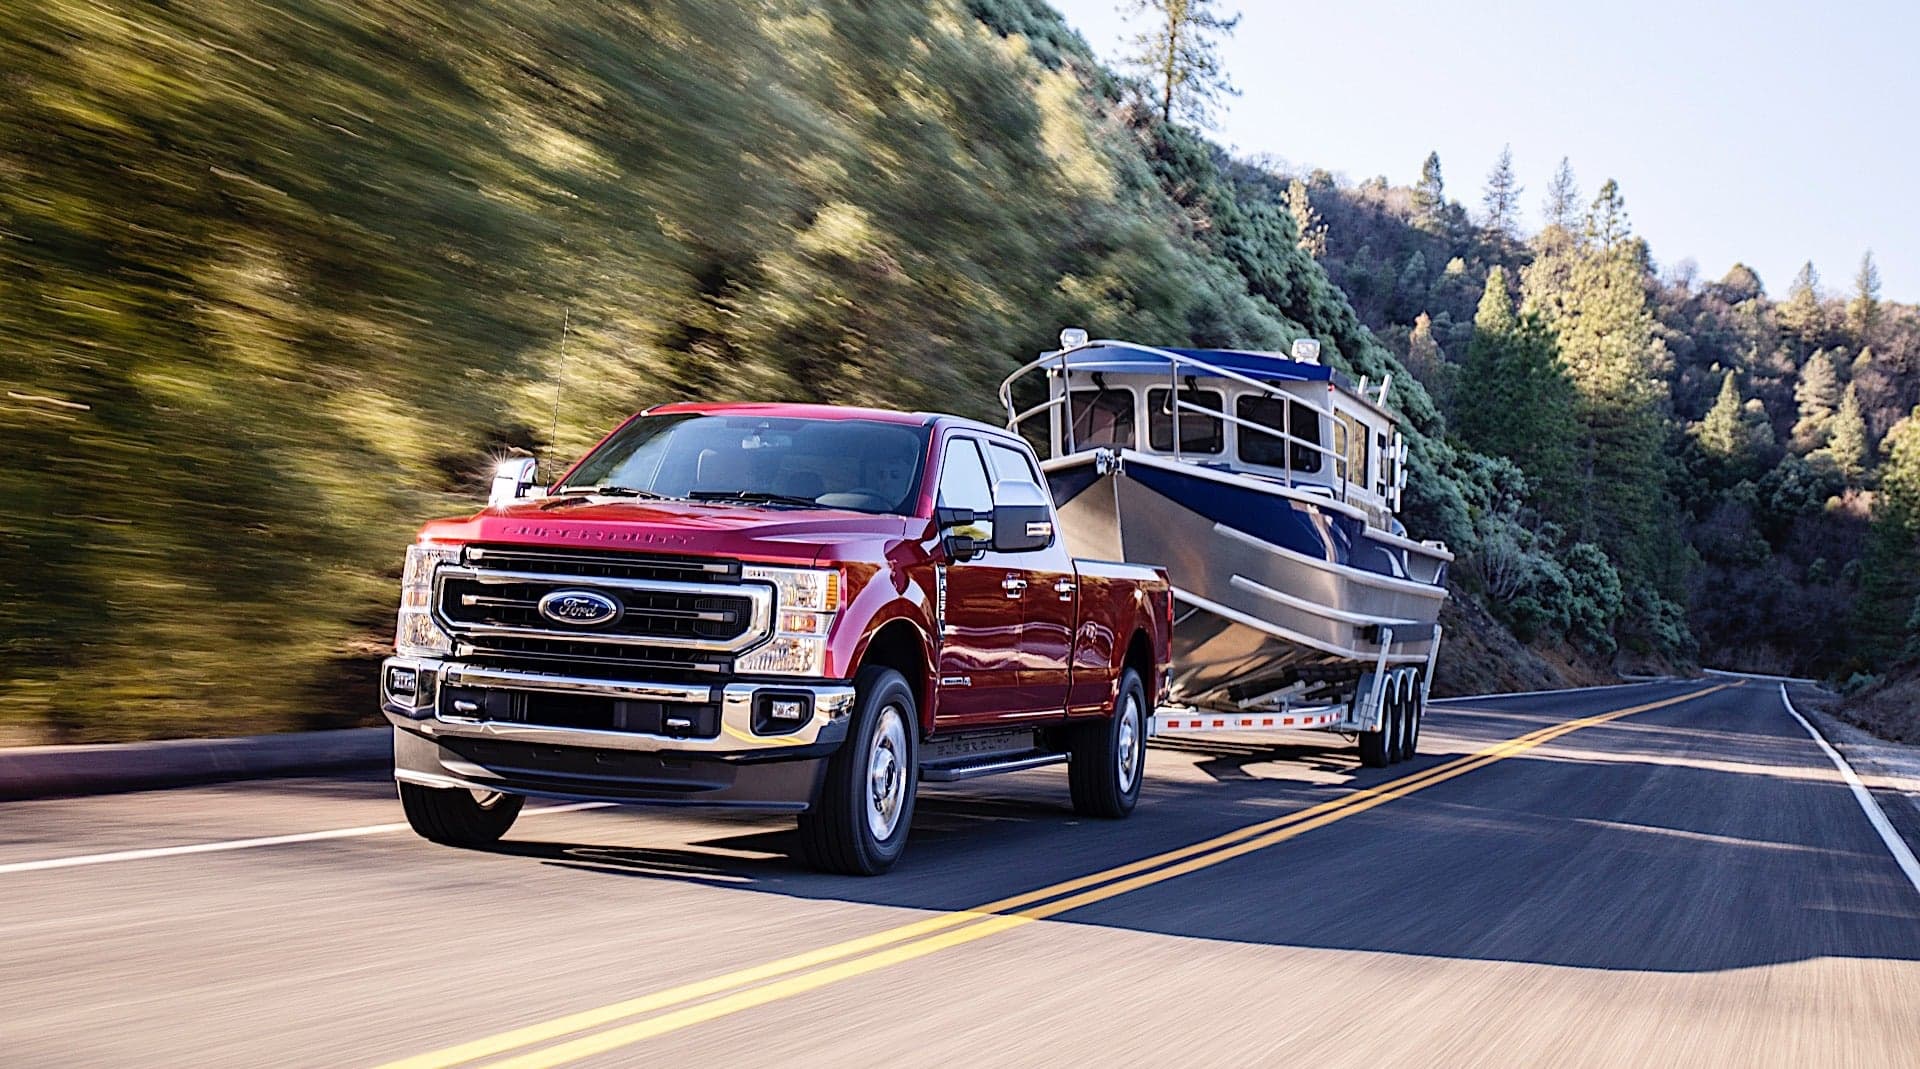 2020 Ford Super Duty’s New Diesel V8 Wins Engine War With 1,050 LB-FT of Torque